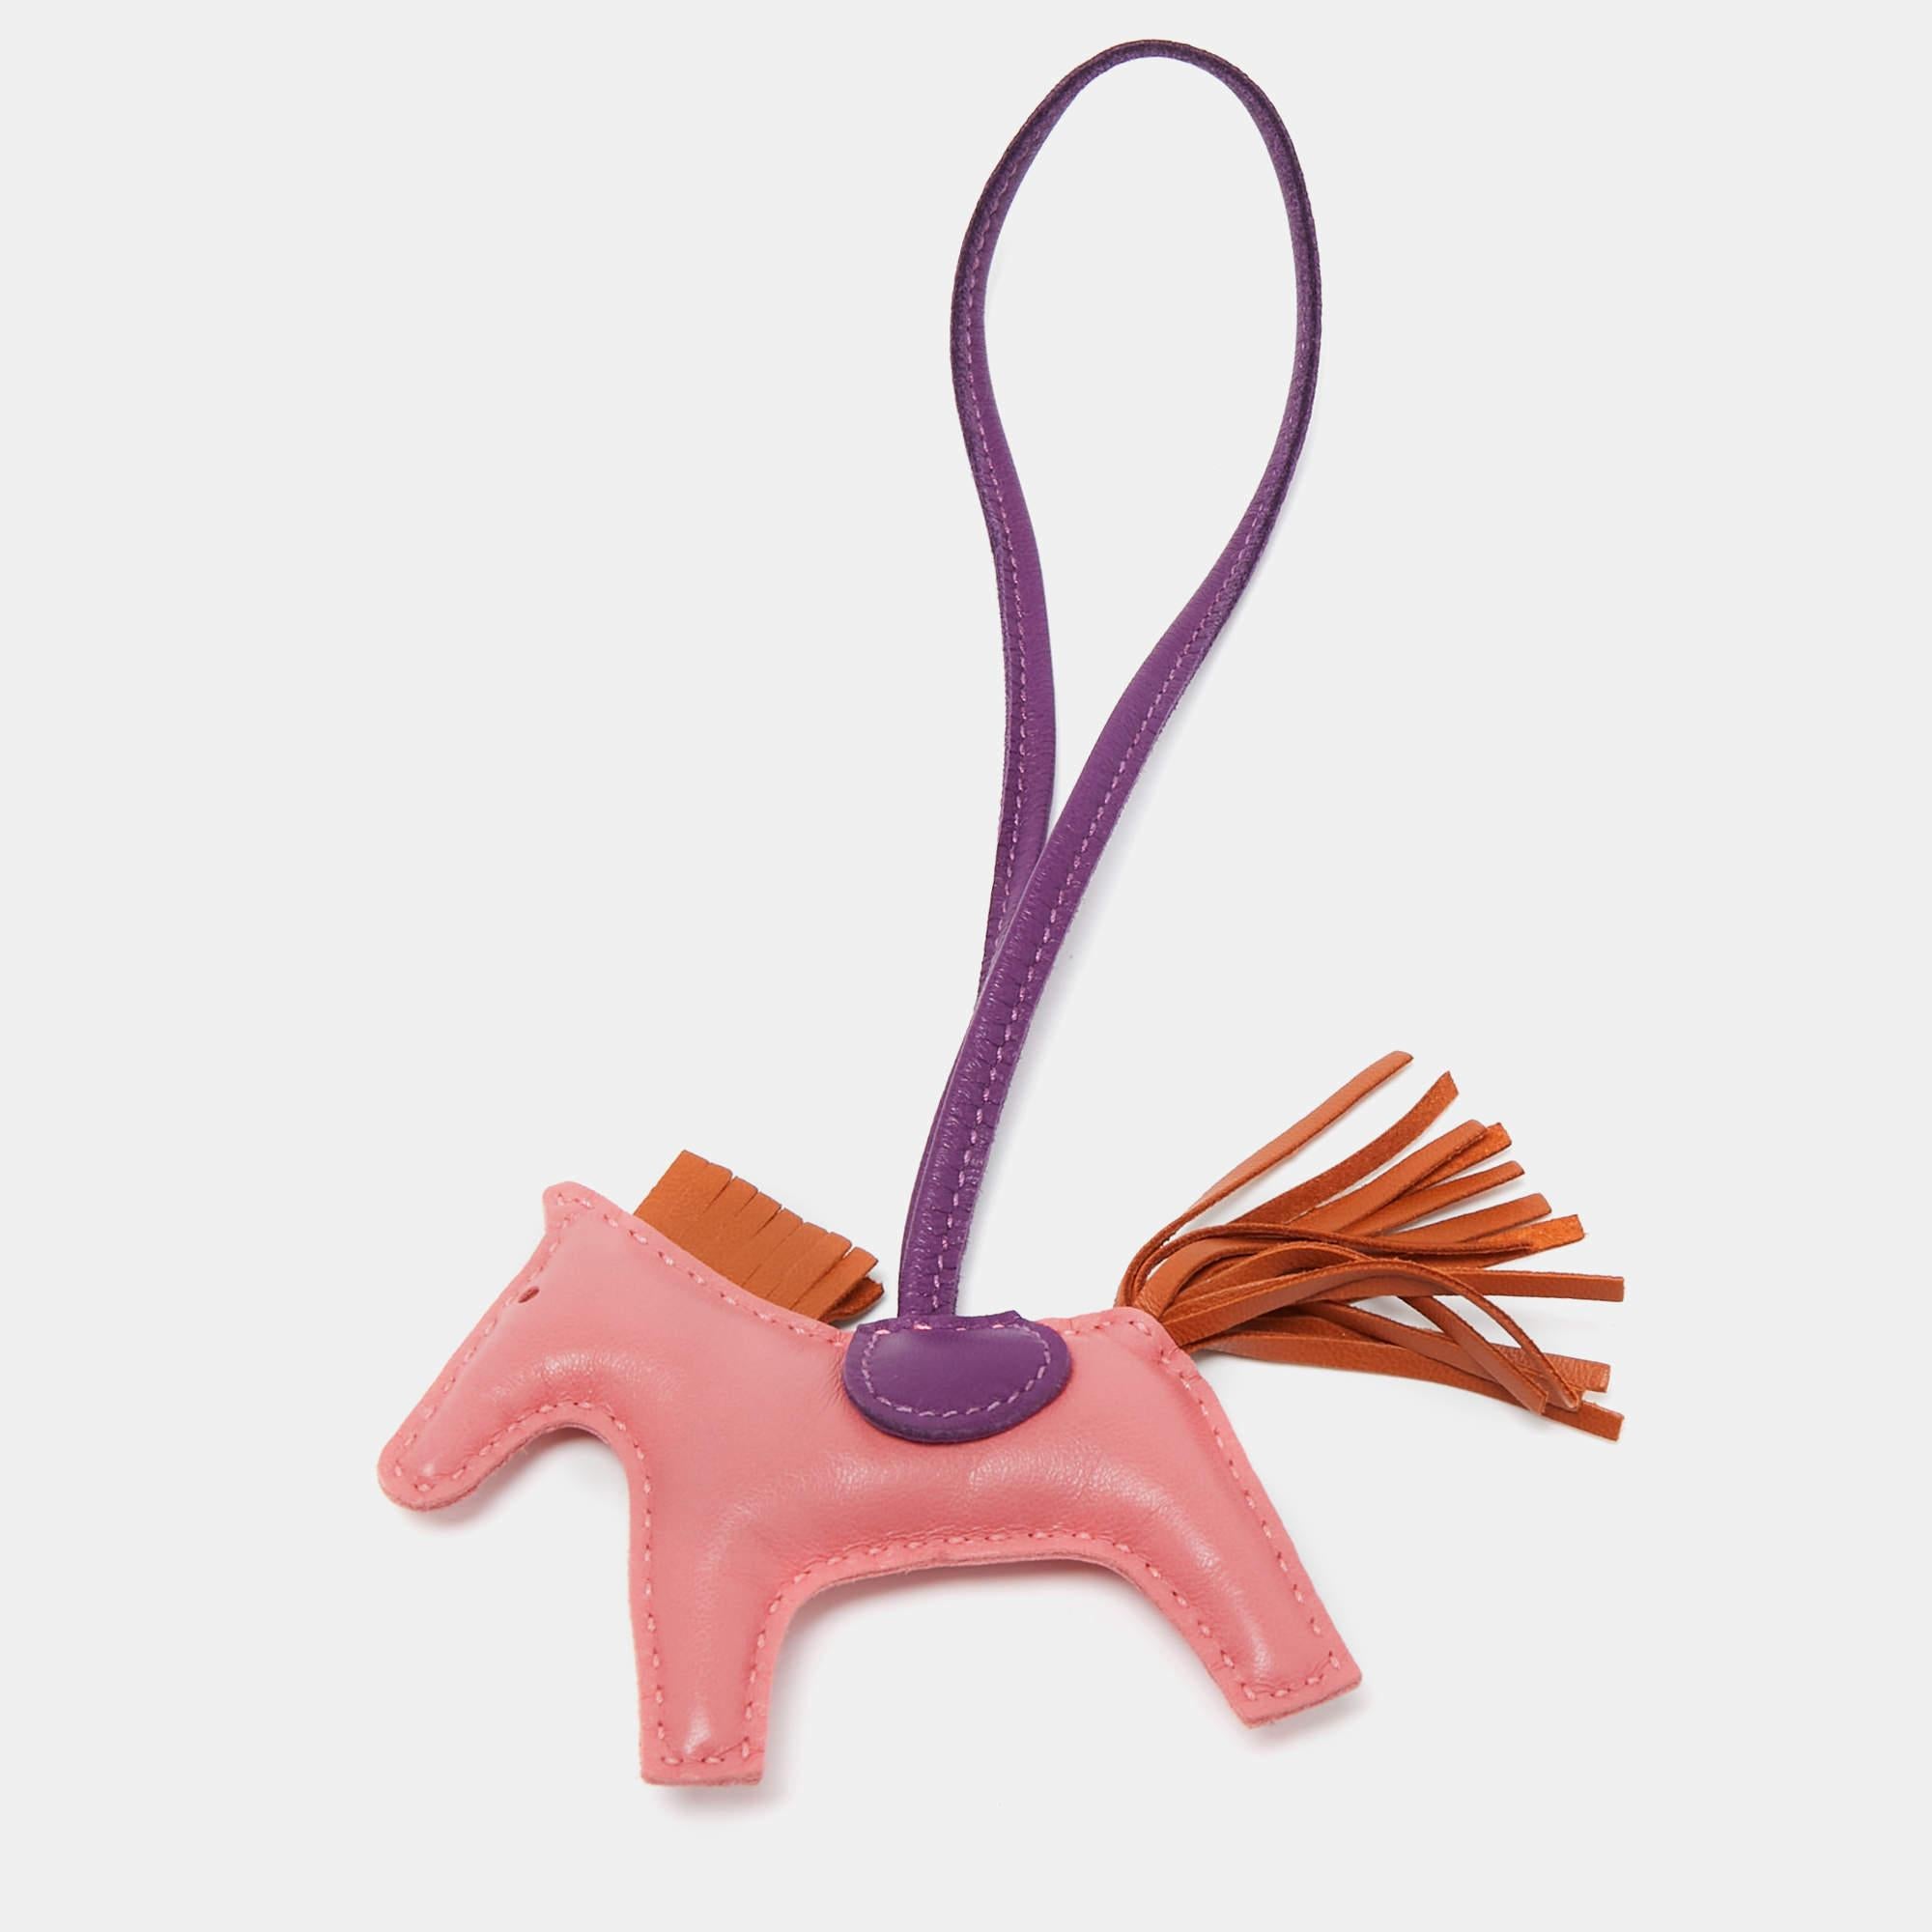 Rodeo bag charms by Hermès come close to being as rare as some of the brand's bags. Collected by fans of Hermès and handbags alike, these little galloping charms are dream pieces to dress up one's precious possessions. Hermès pays homage to its